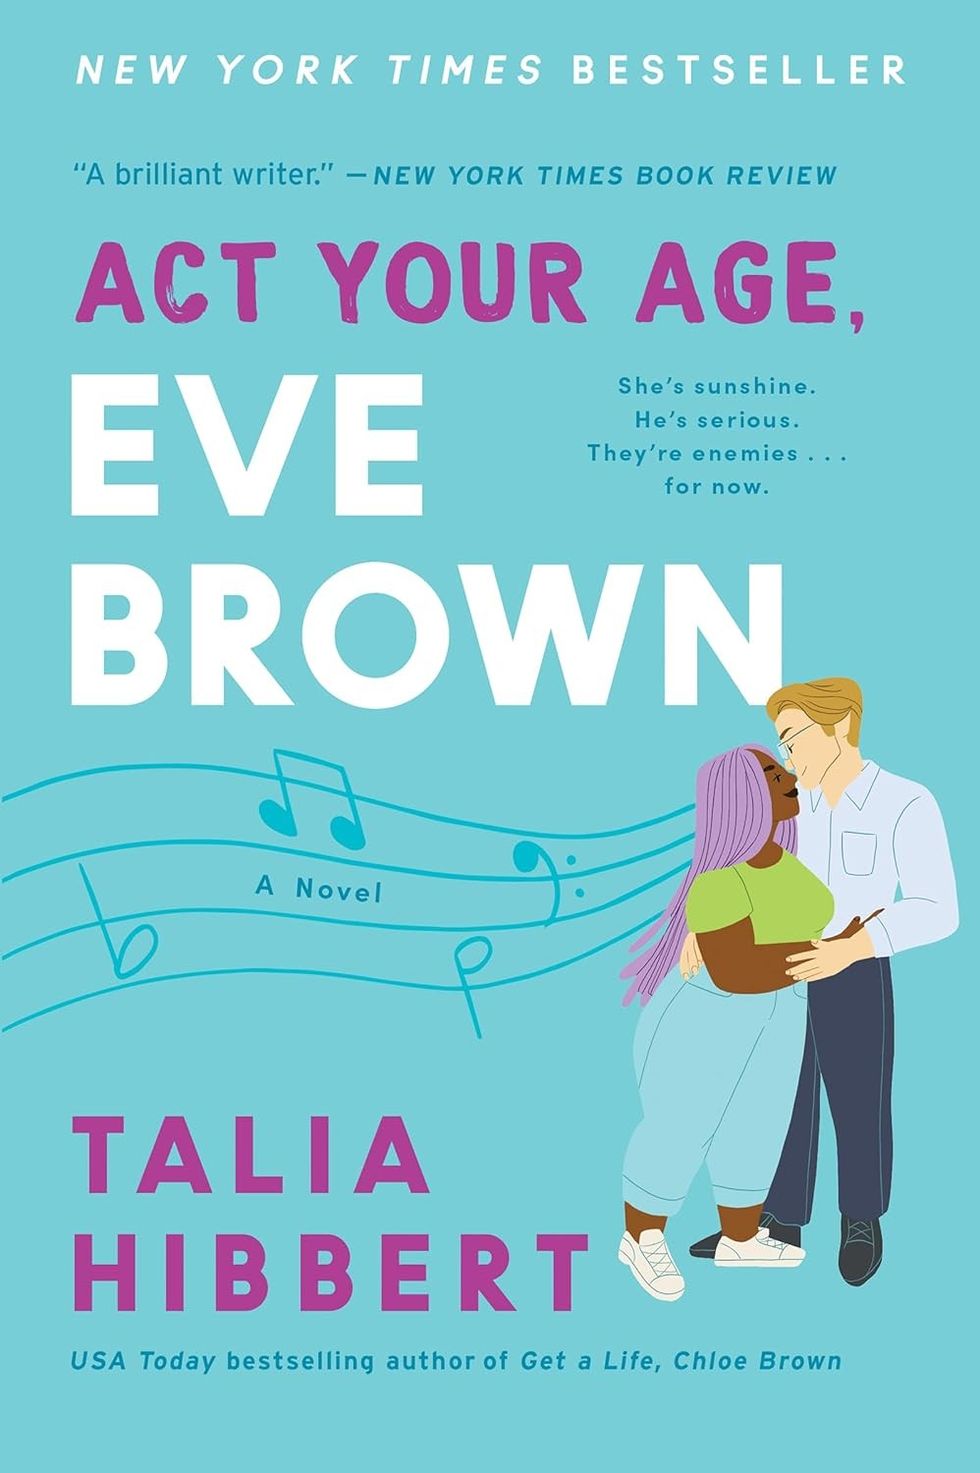 Act Your Age, Eve Brown by Talie Hibbert